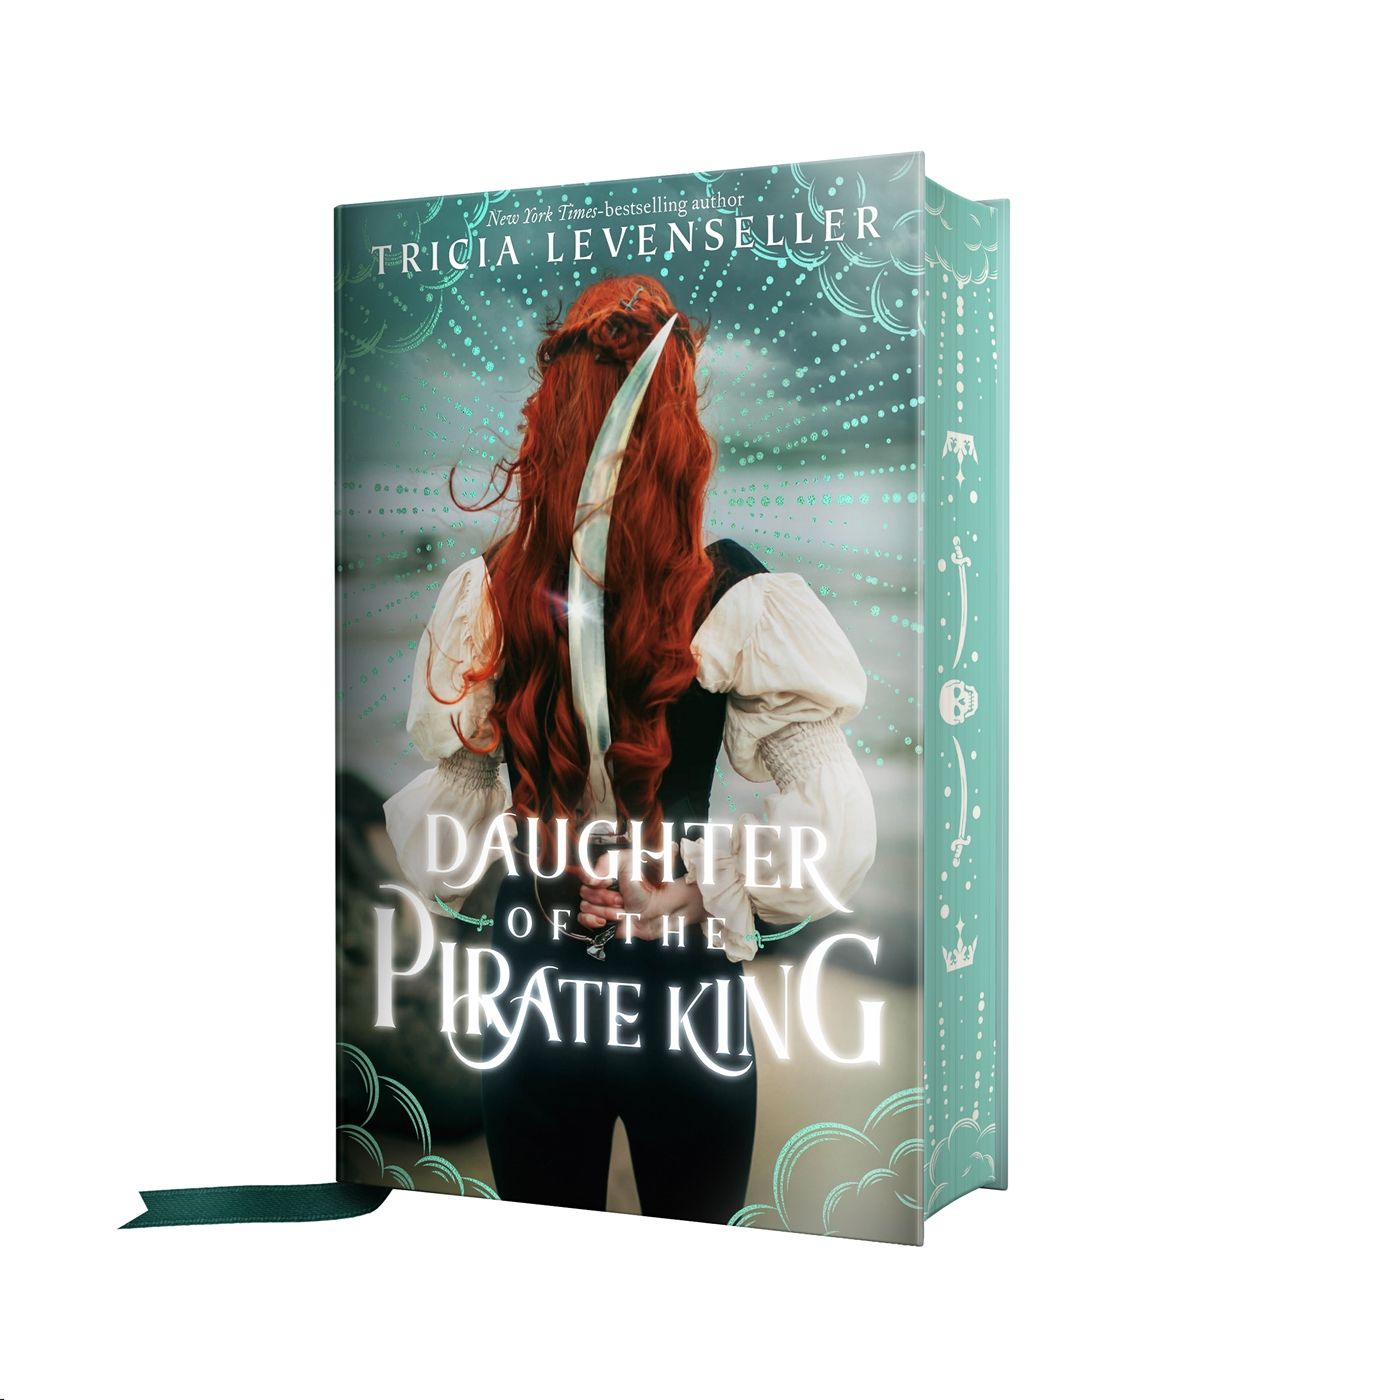 Book cover of Daughter of the Pirate King by Tricia Levenseller